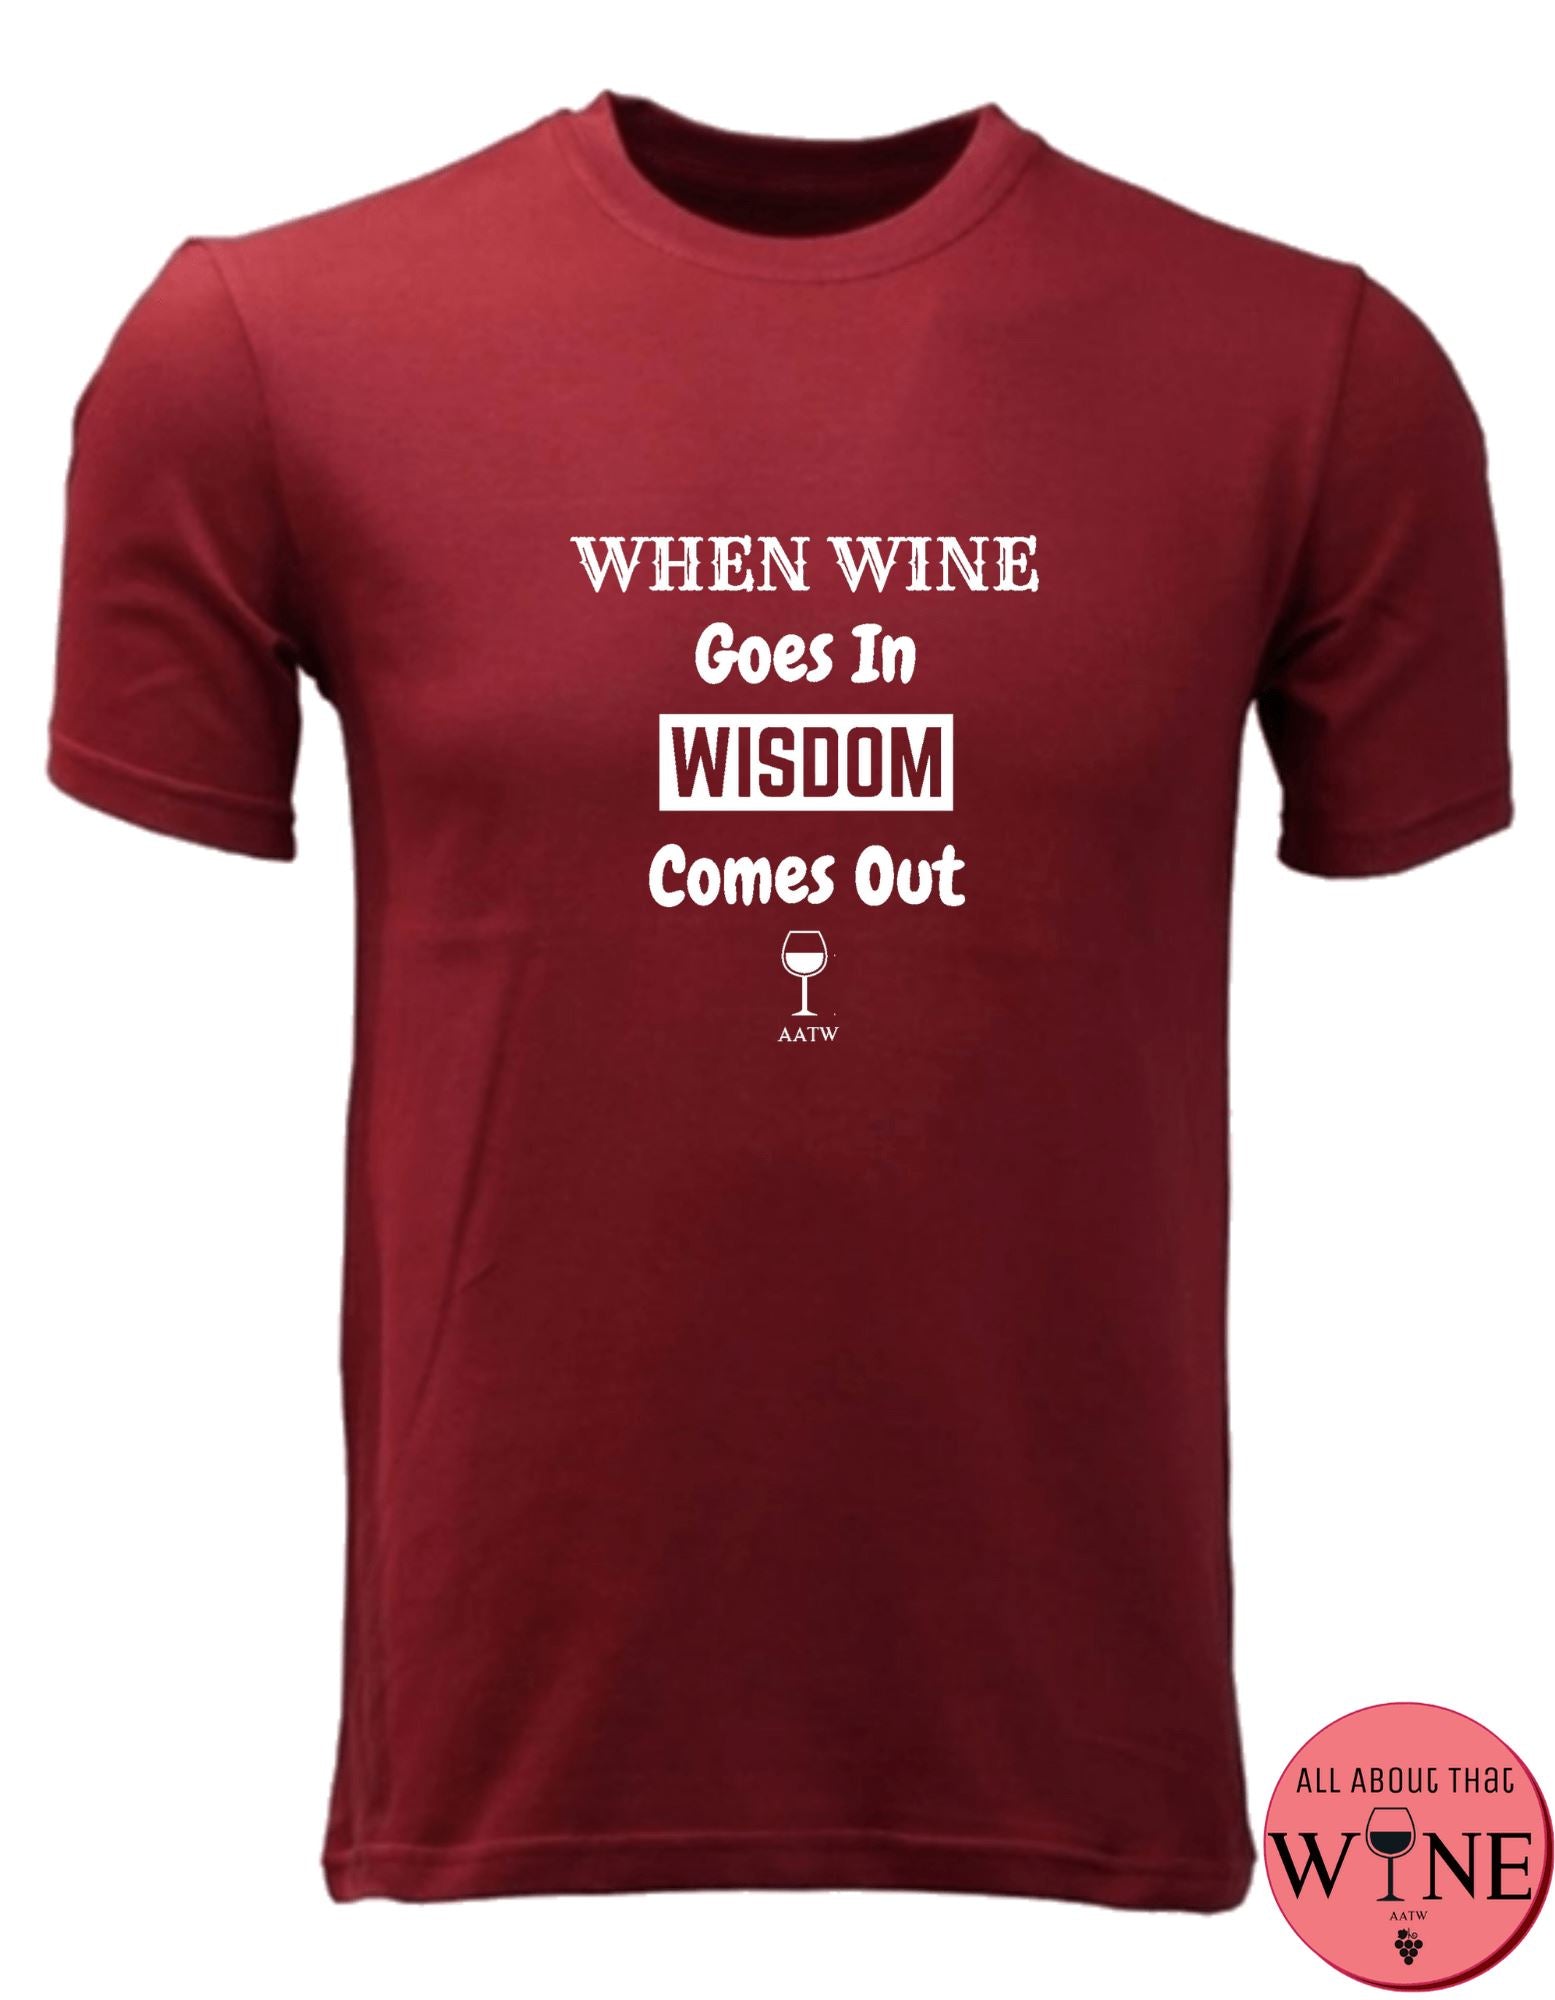 When Wine Goes In - Men's T-shirt S Deep red with white